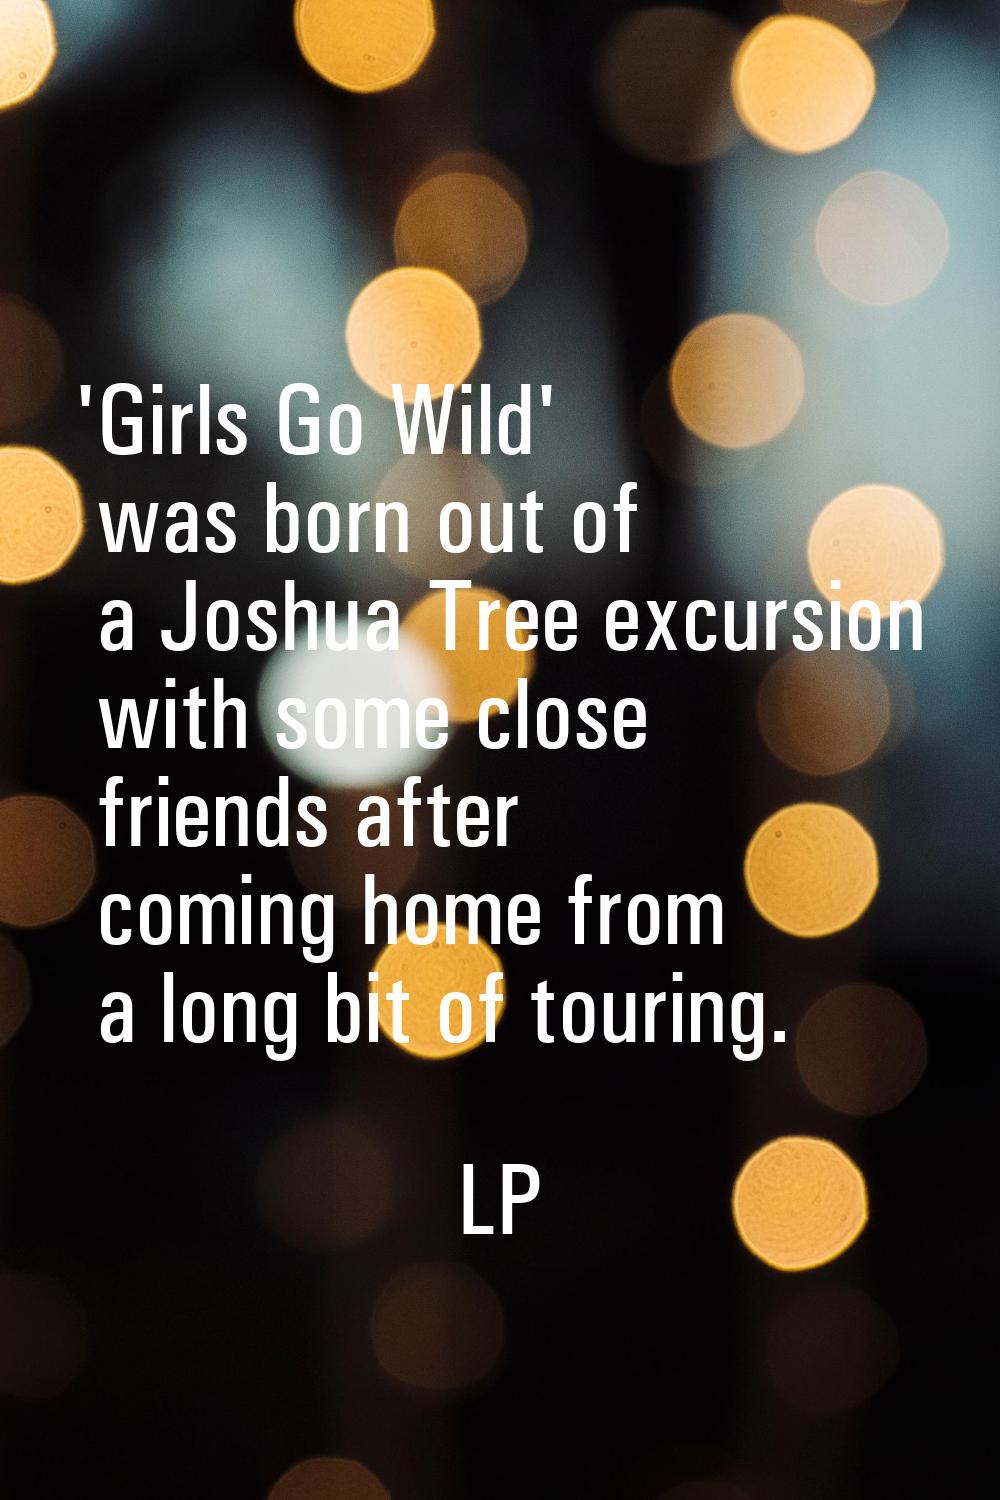 'Girls Go Wild' was born out of a Joshua Tree excursion with some close friends after coming home f